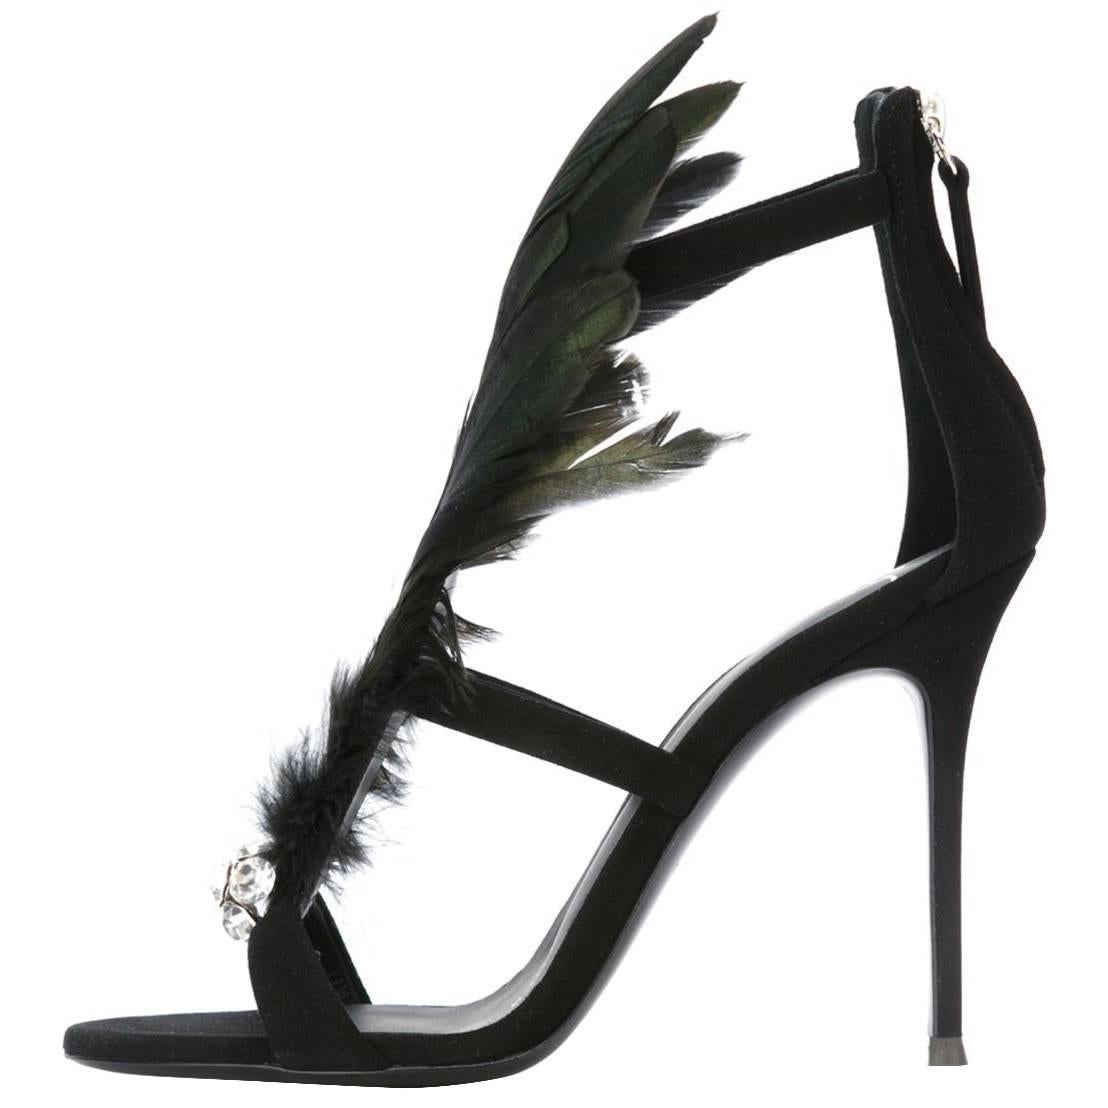 Giuseppe Zanotti NEW & SOLD OUT Black Peacock Evening Sandals Heels in Box